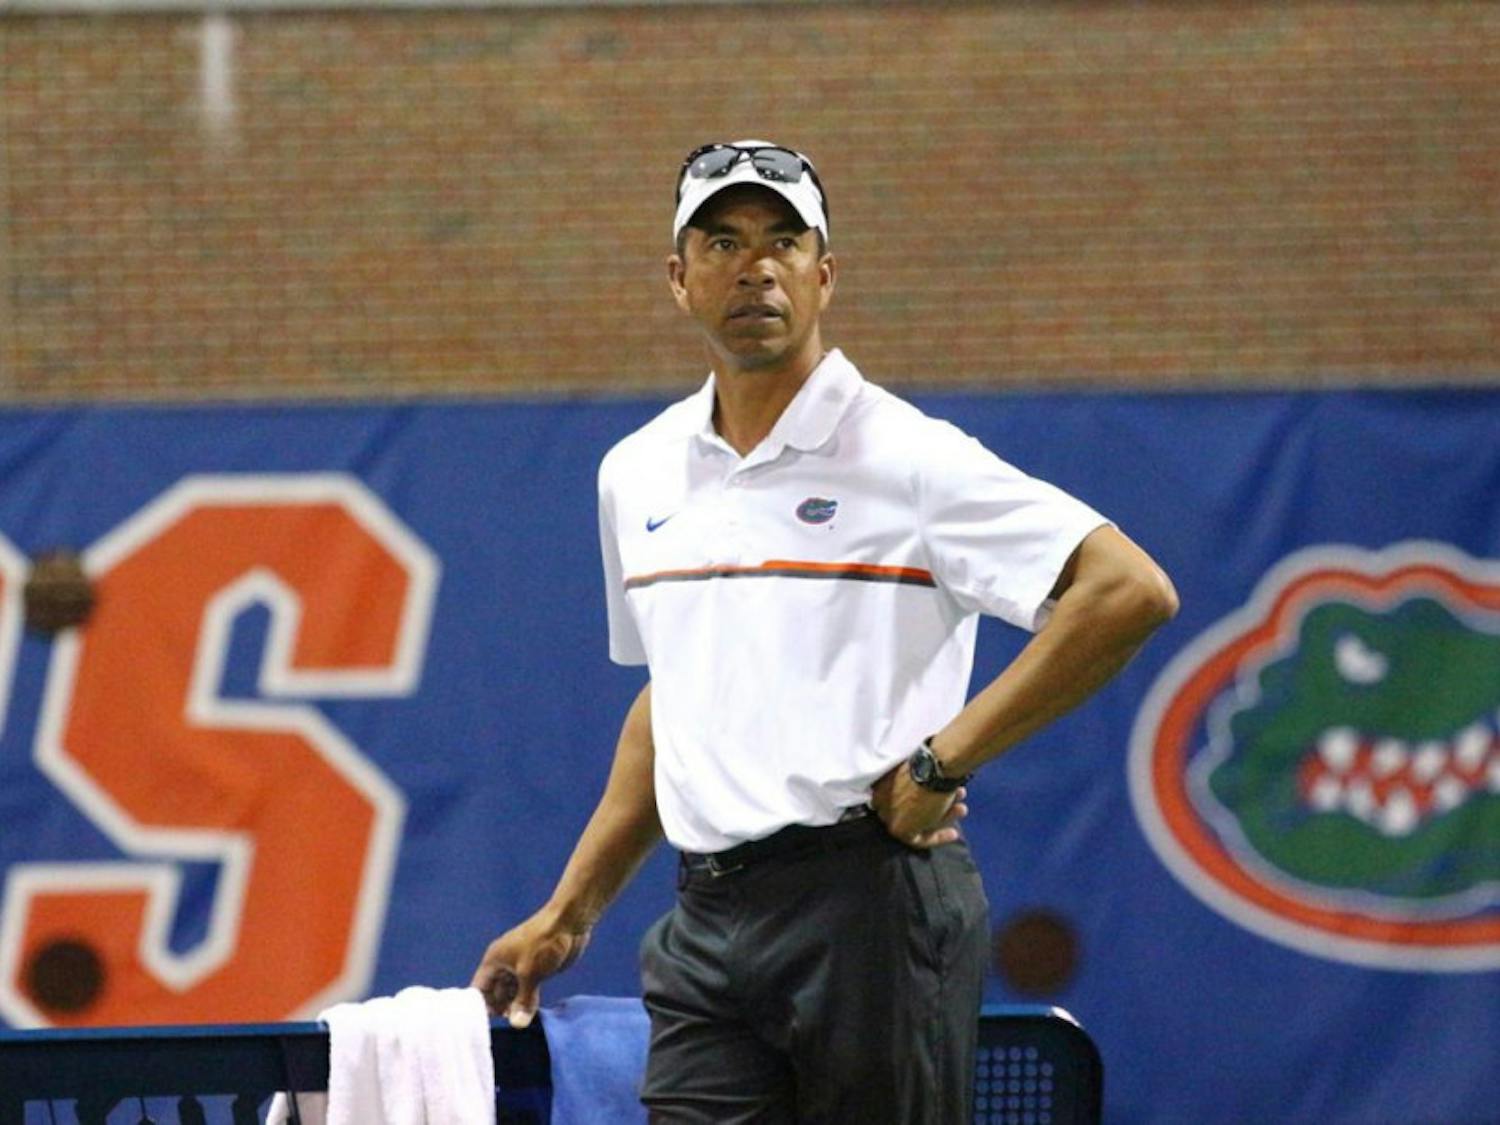 Bryan Shelton was modest after earning his 100th career win as Florida's coach. “I don't hit a single ball in these matches so the players are the ones that should get the credit,” he said. 